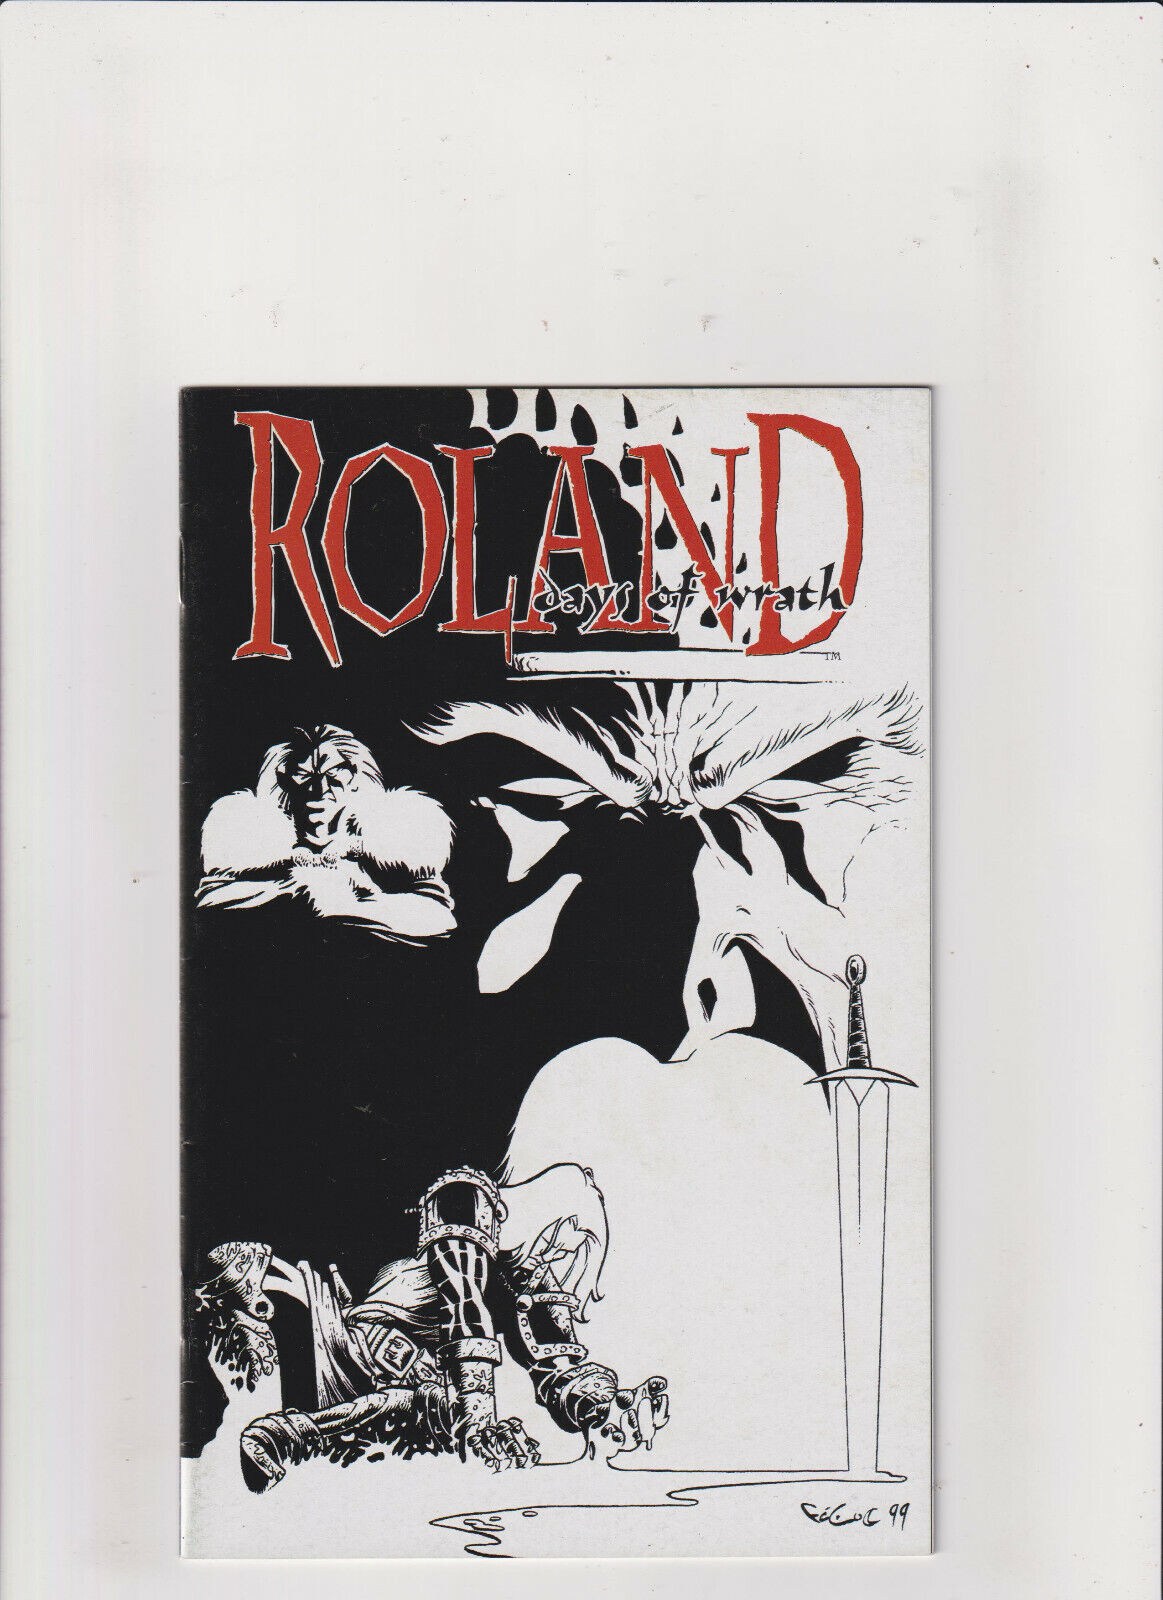 Roland: Days of Wrath VF/NM 9.0 Tere Major Comics 1999 Song of Roland Ashcan